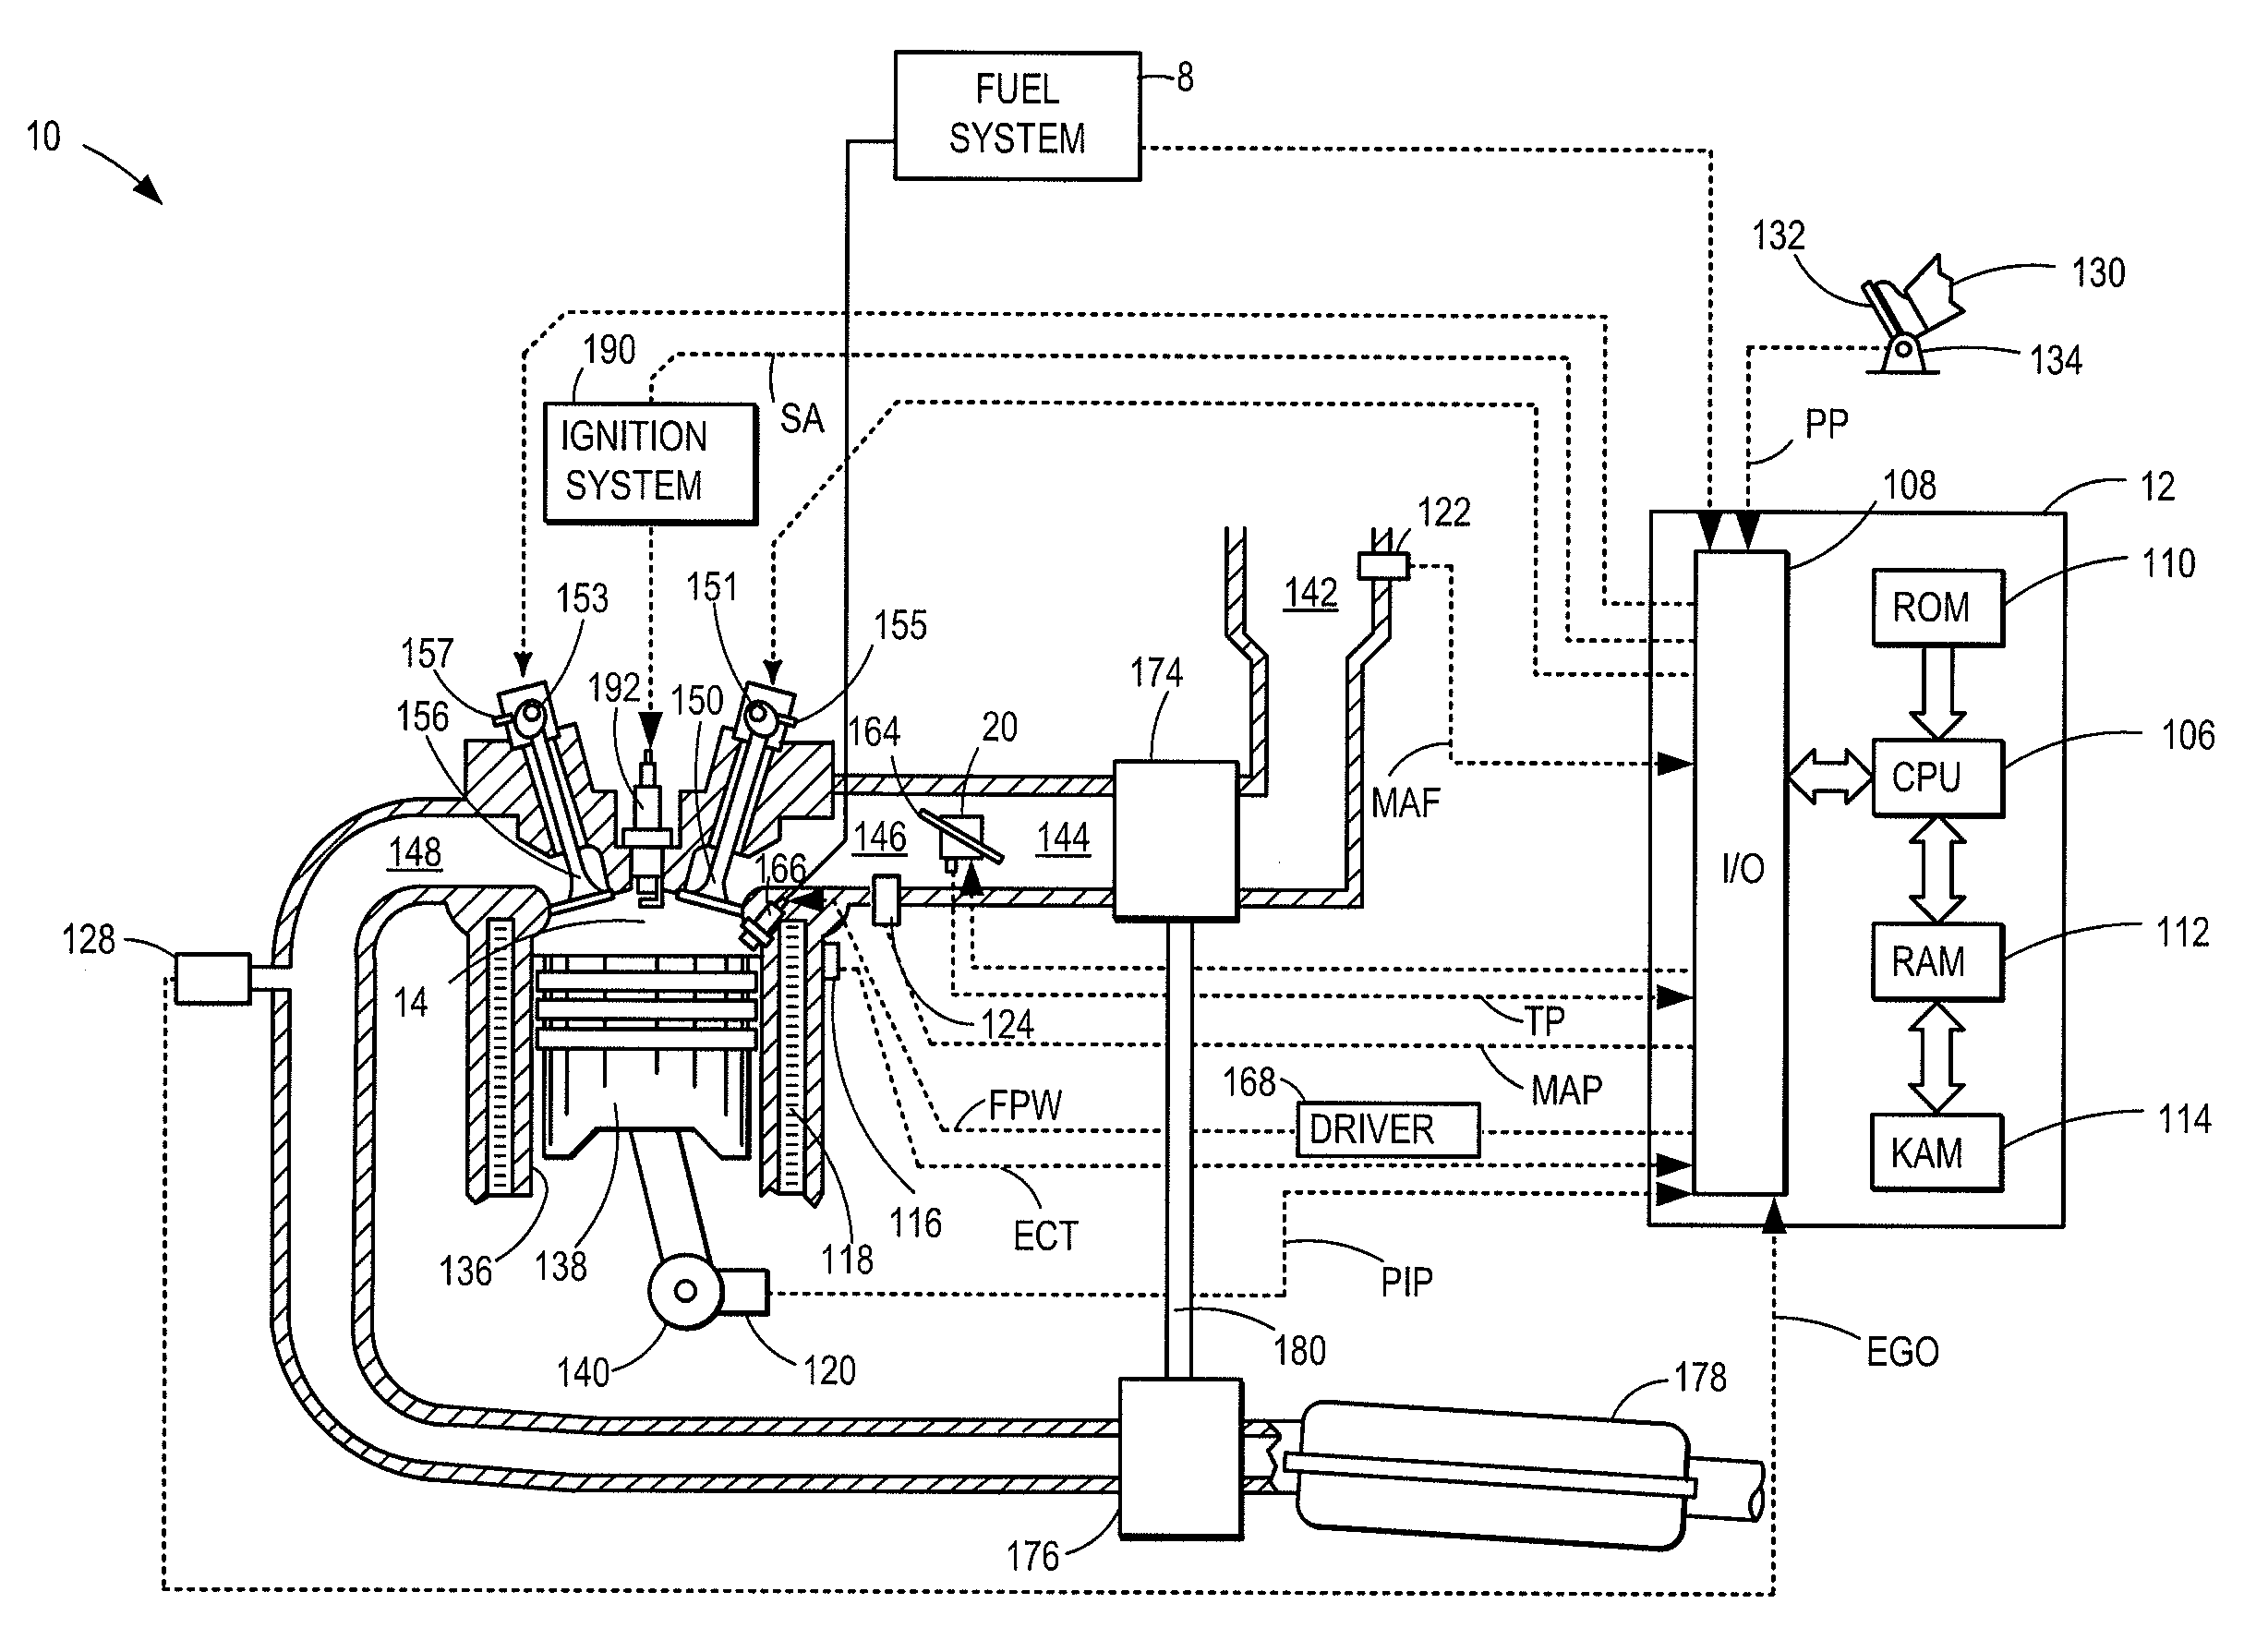 Fuel-based injection control